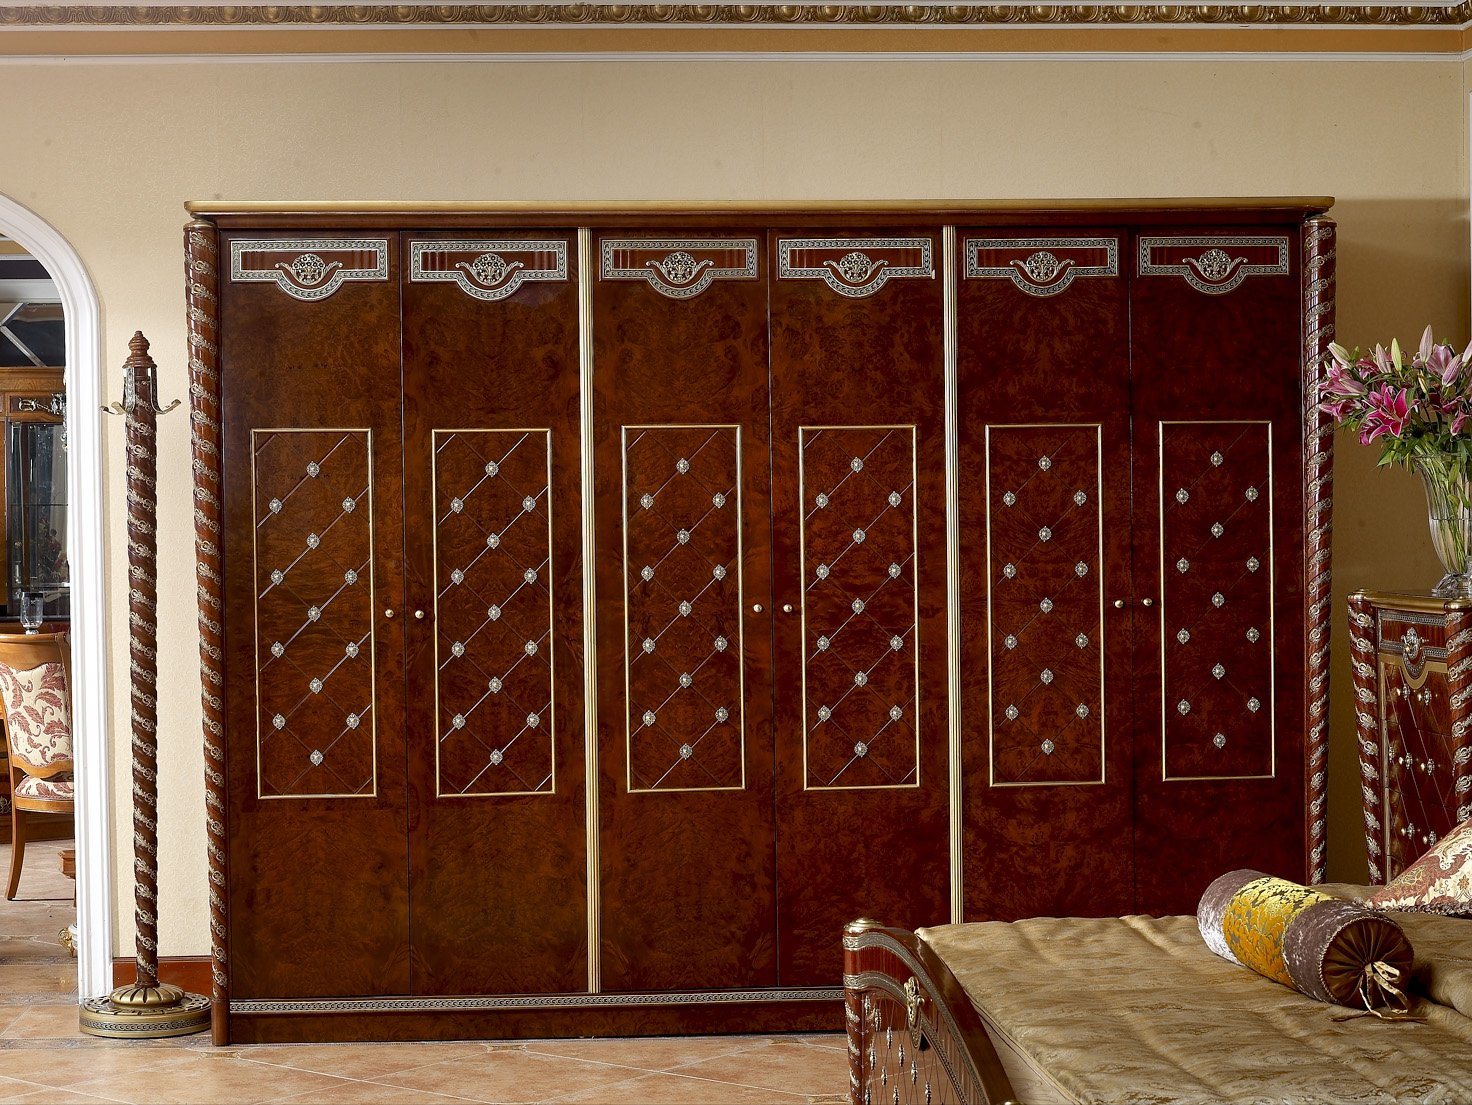 0026 Conicalness Legs Classical Royal Brown Color Wardrobe